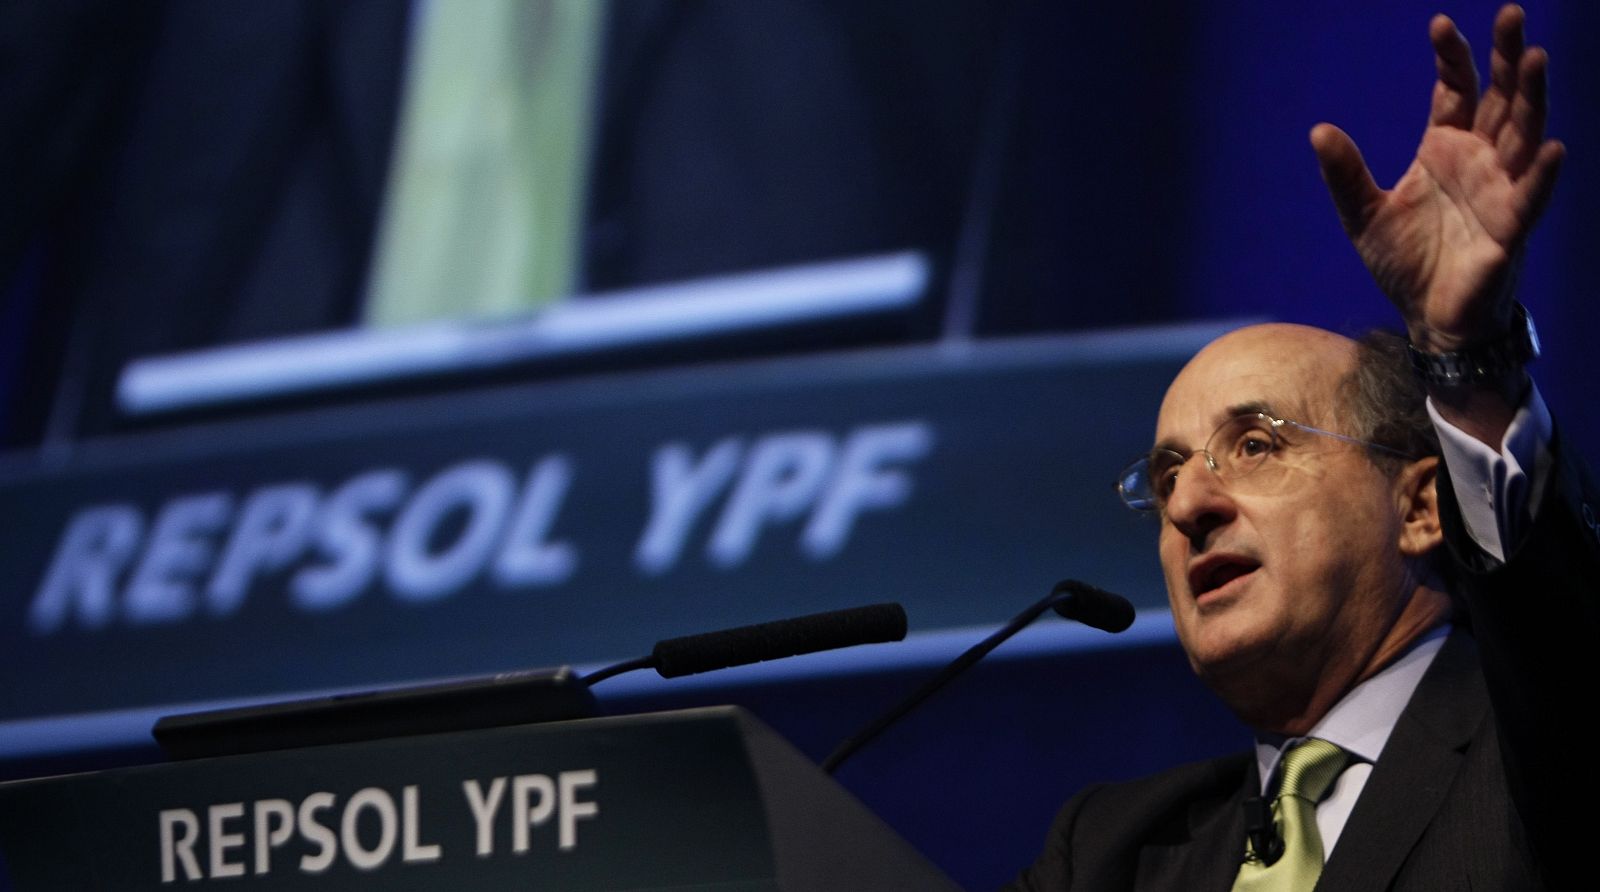 Repsol YPF's chairman Brufau gestures during a speech in Madrid